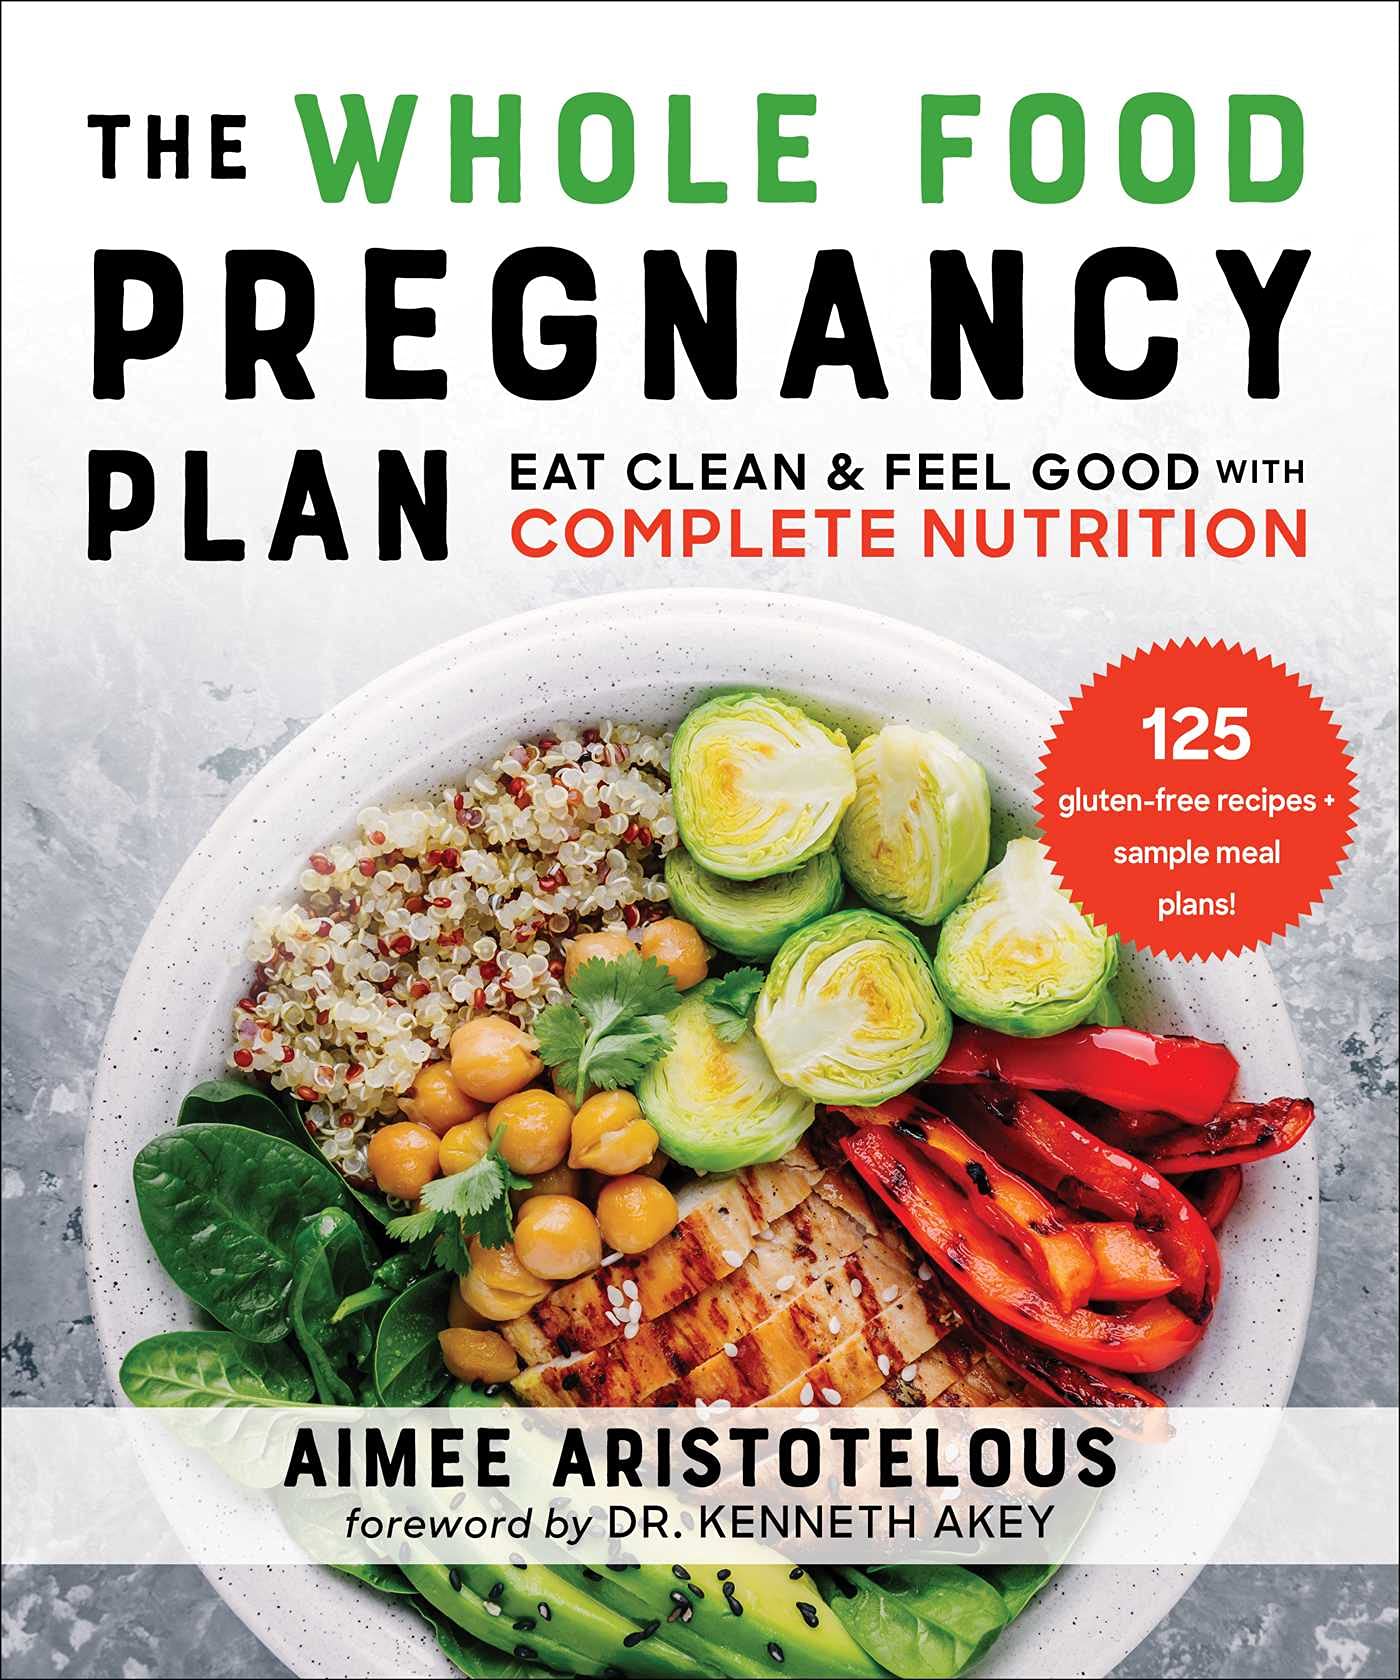 Whole Food Pregnancy Plan: Eat Clean & Feel Good with Complete Nutrition (Aimee Aristotelous)